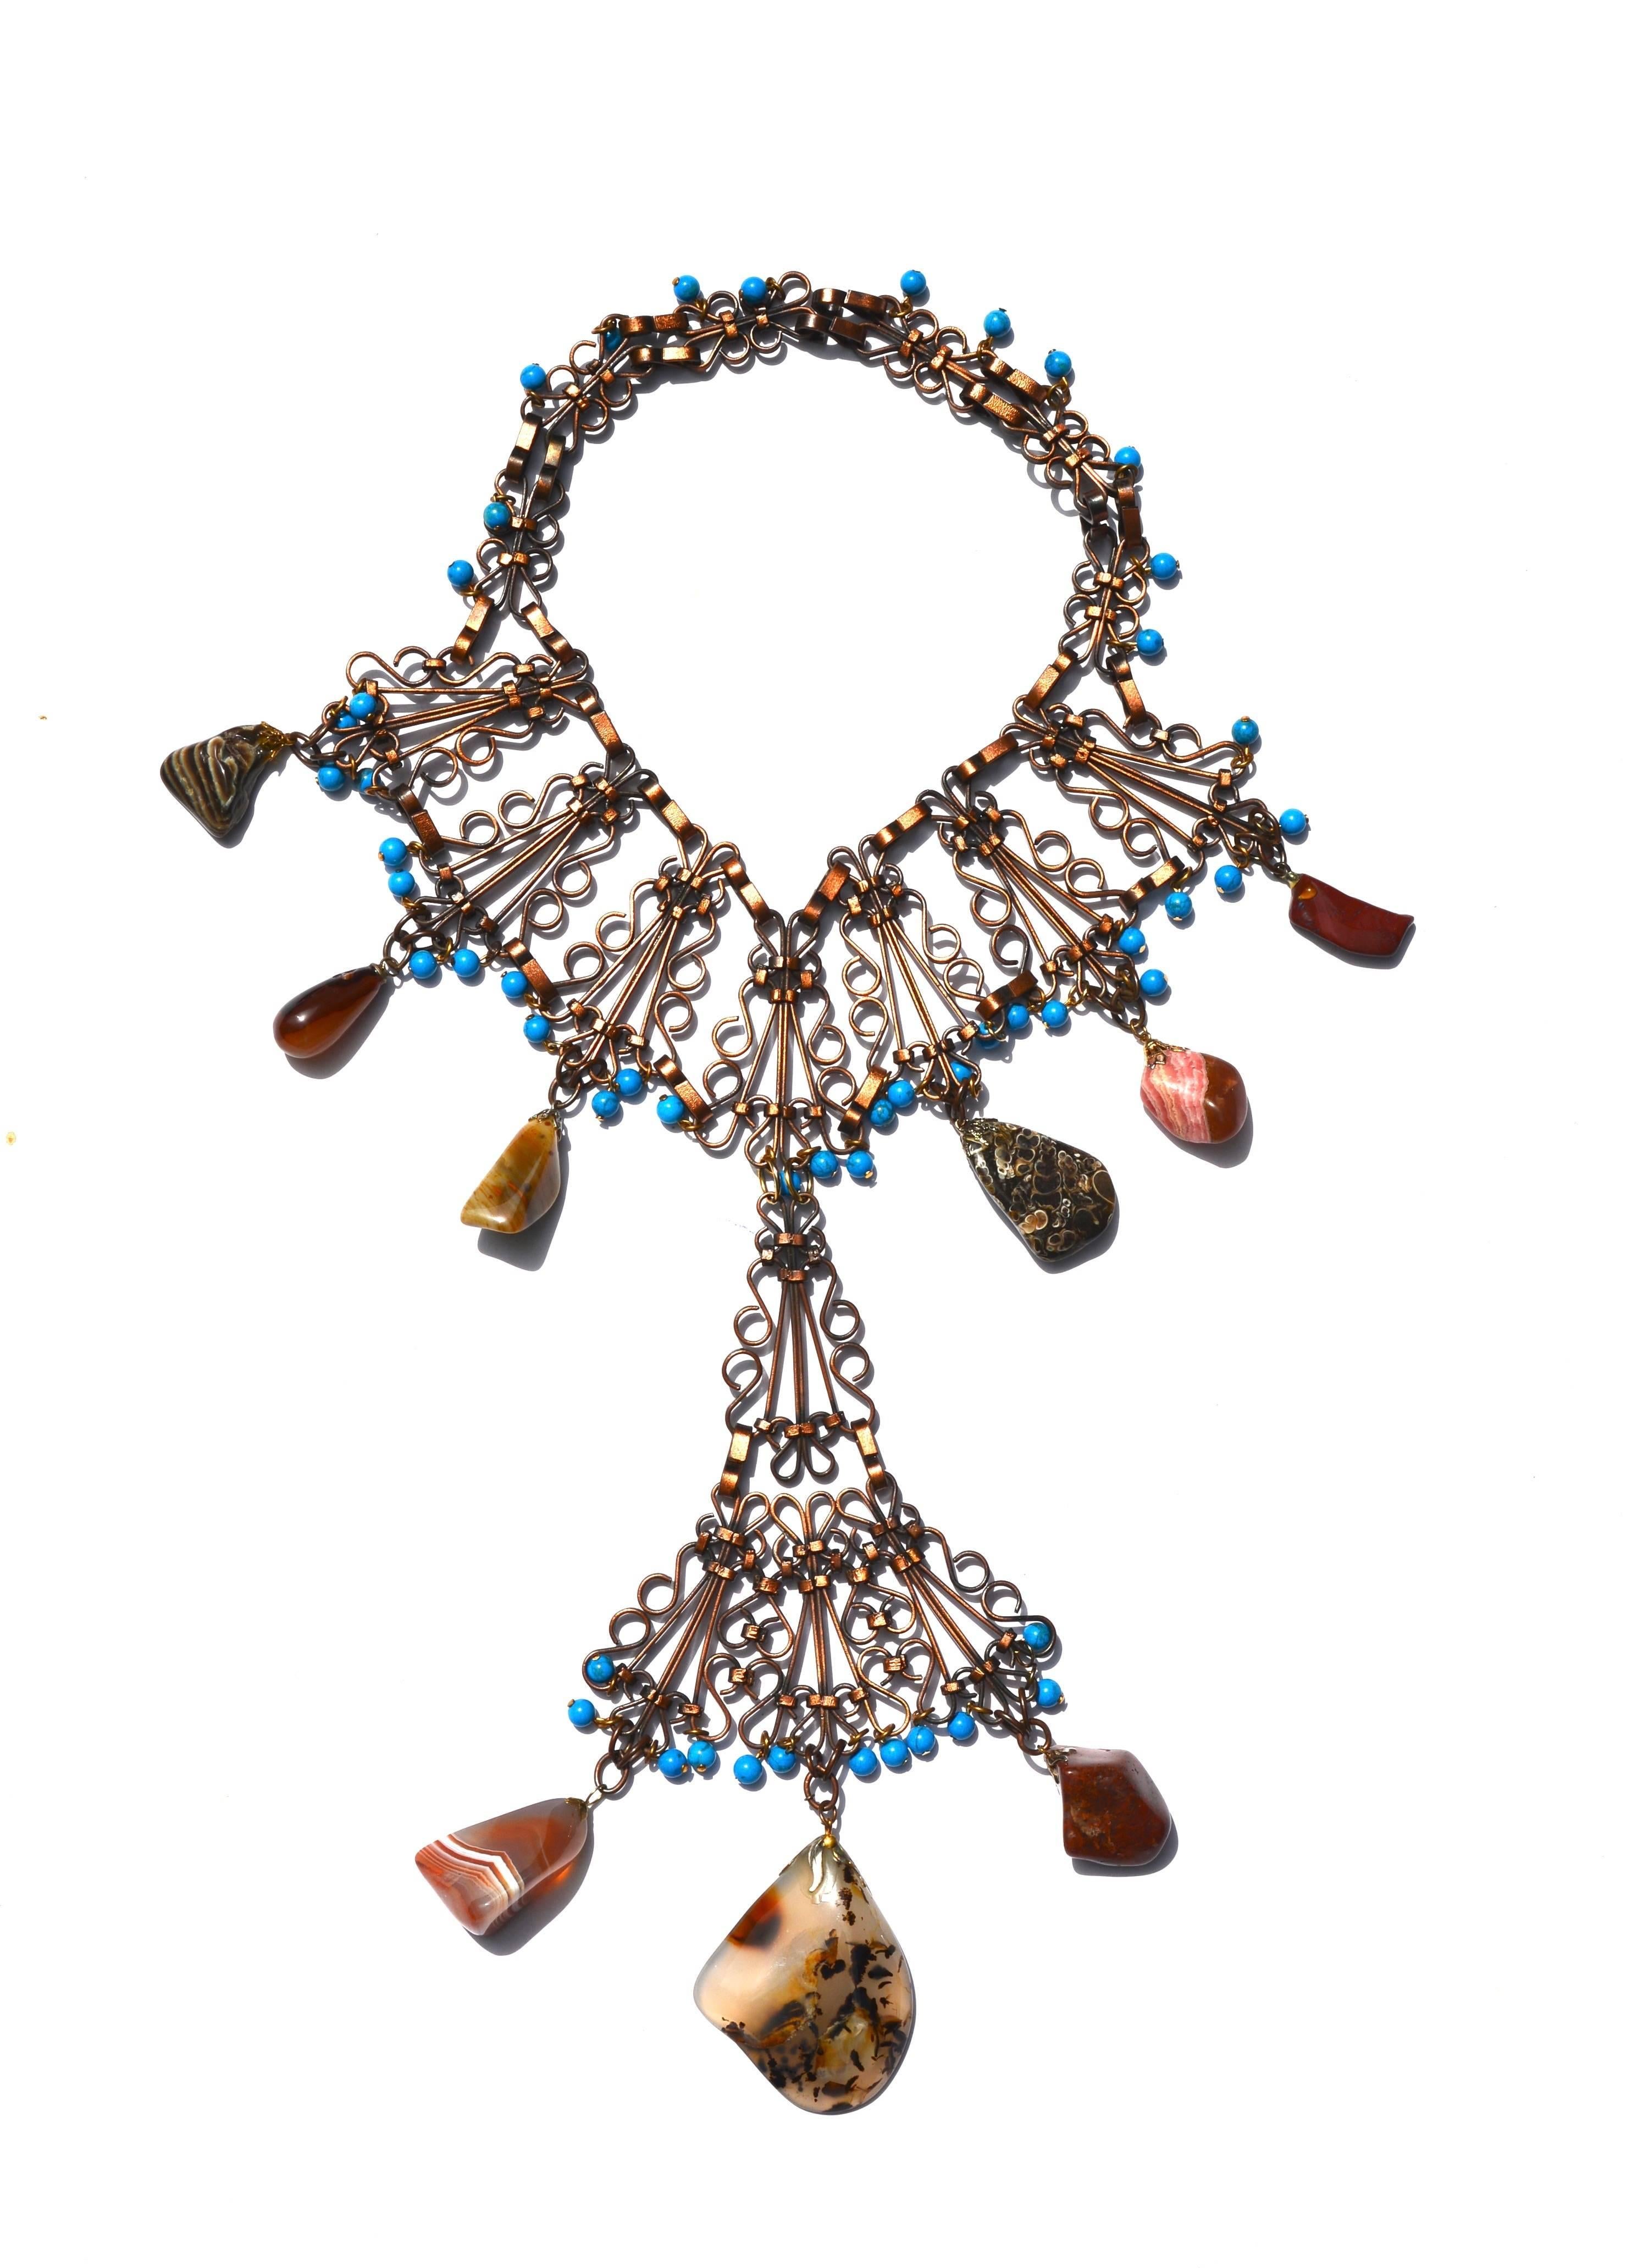 Oversized copper and stone necklace with turquoise glass beads. Unsigned. Larger style. Last image is an ig photo for fun, but it does show the scale of it on! 17